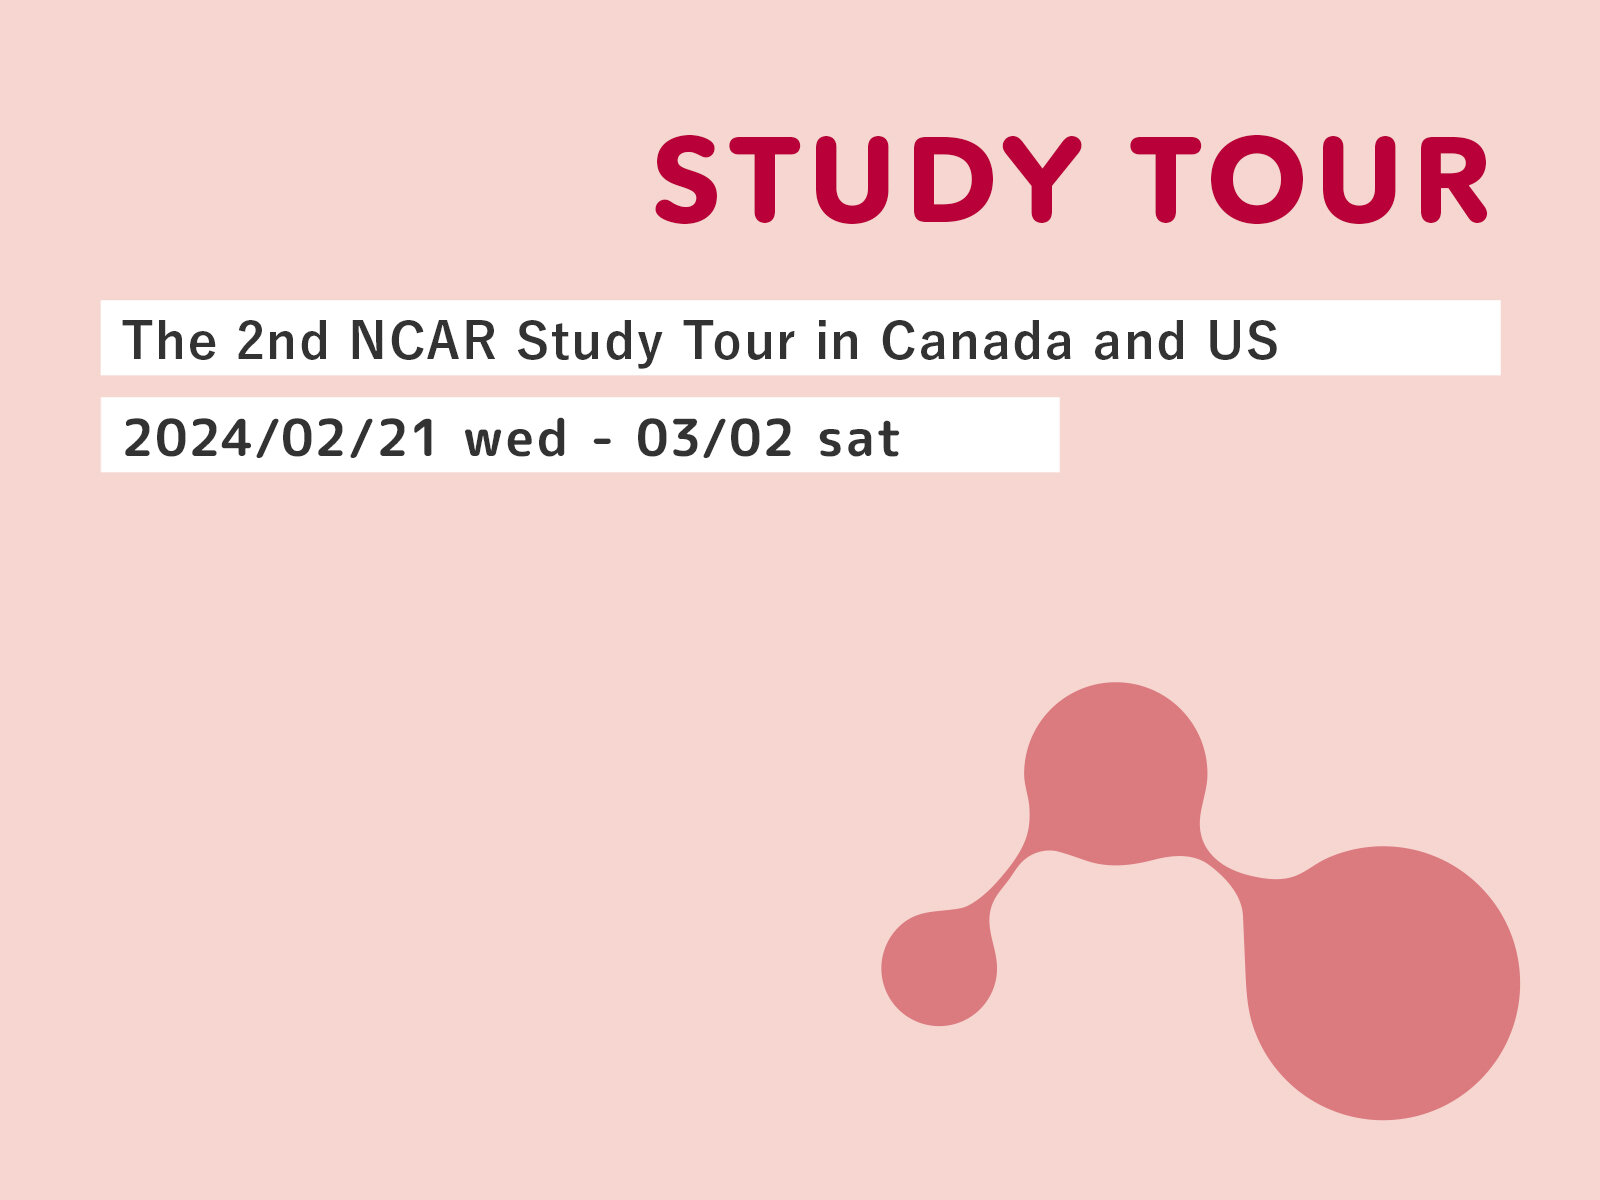 Call for Participants : The 2nd NCAR Study Tour in Canada and US

